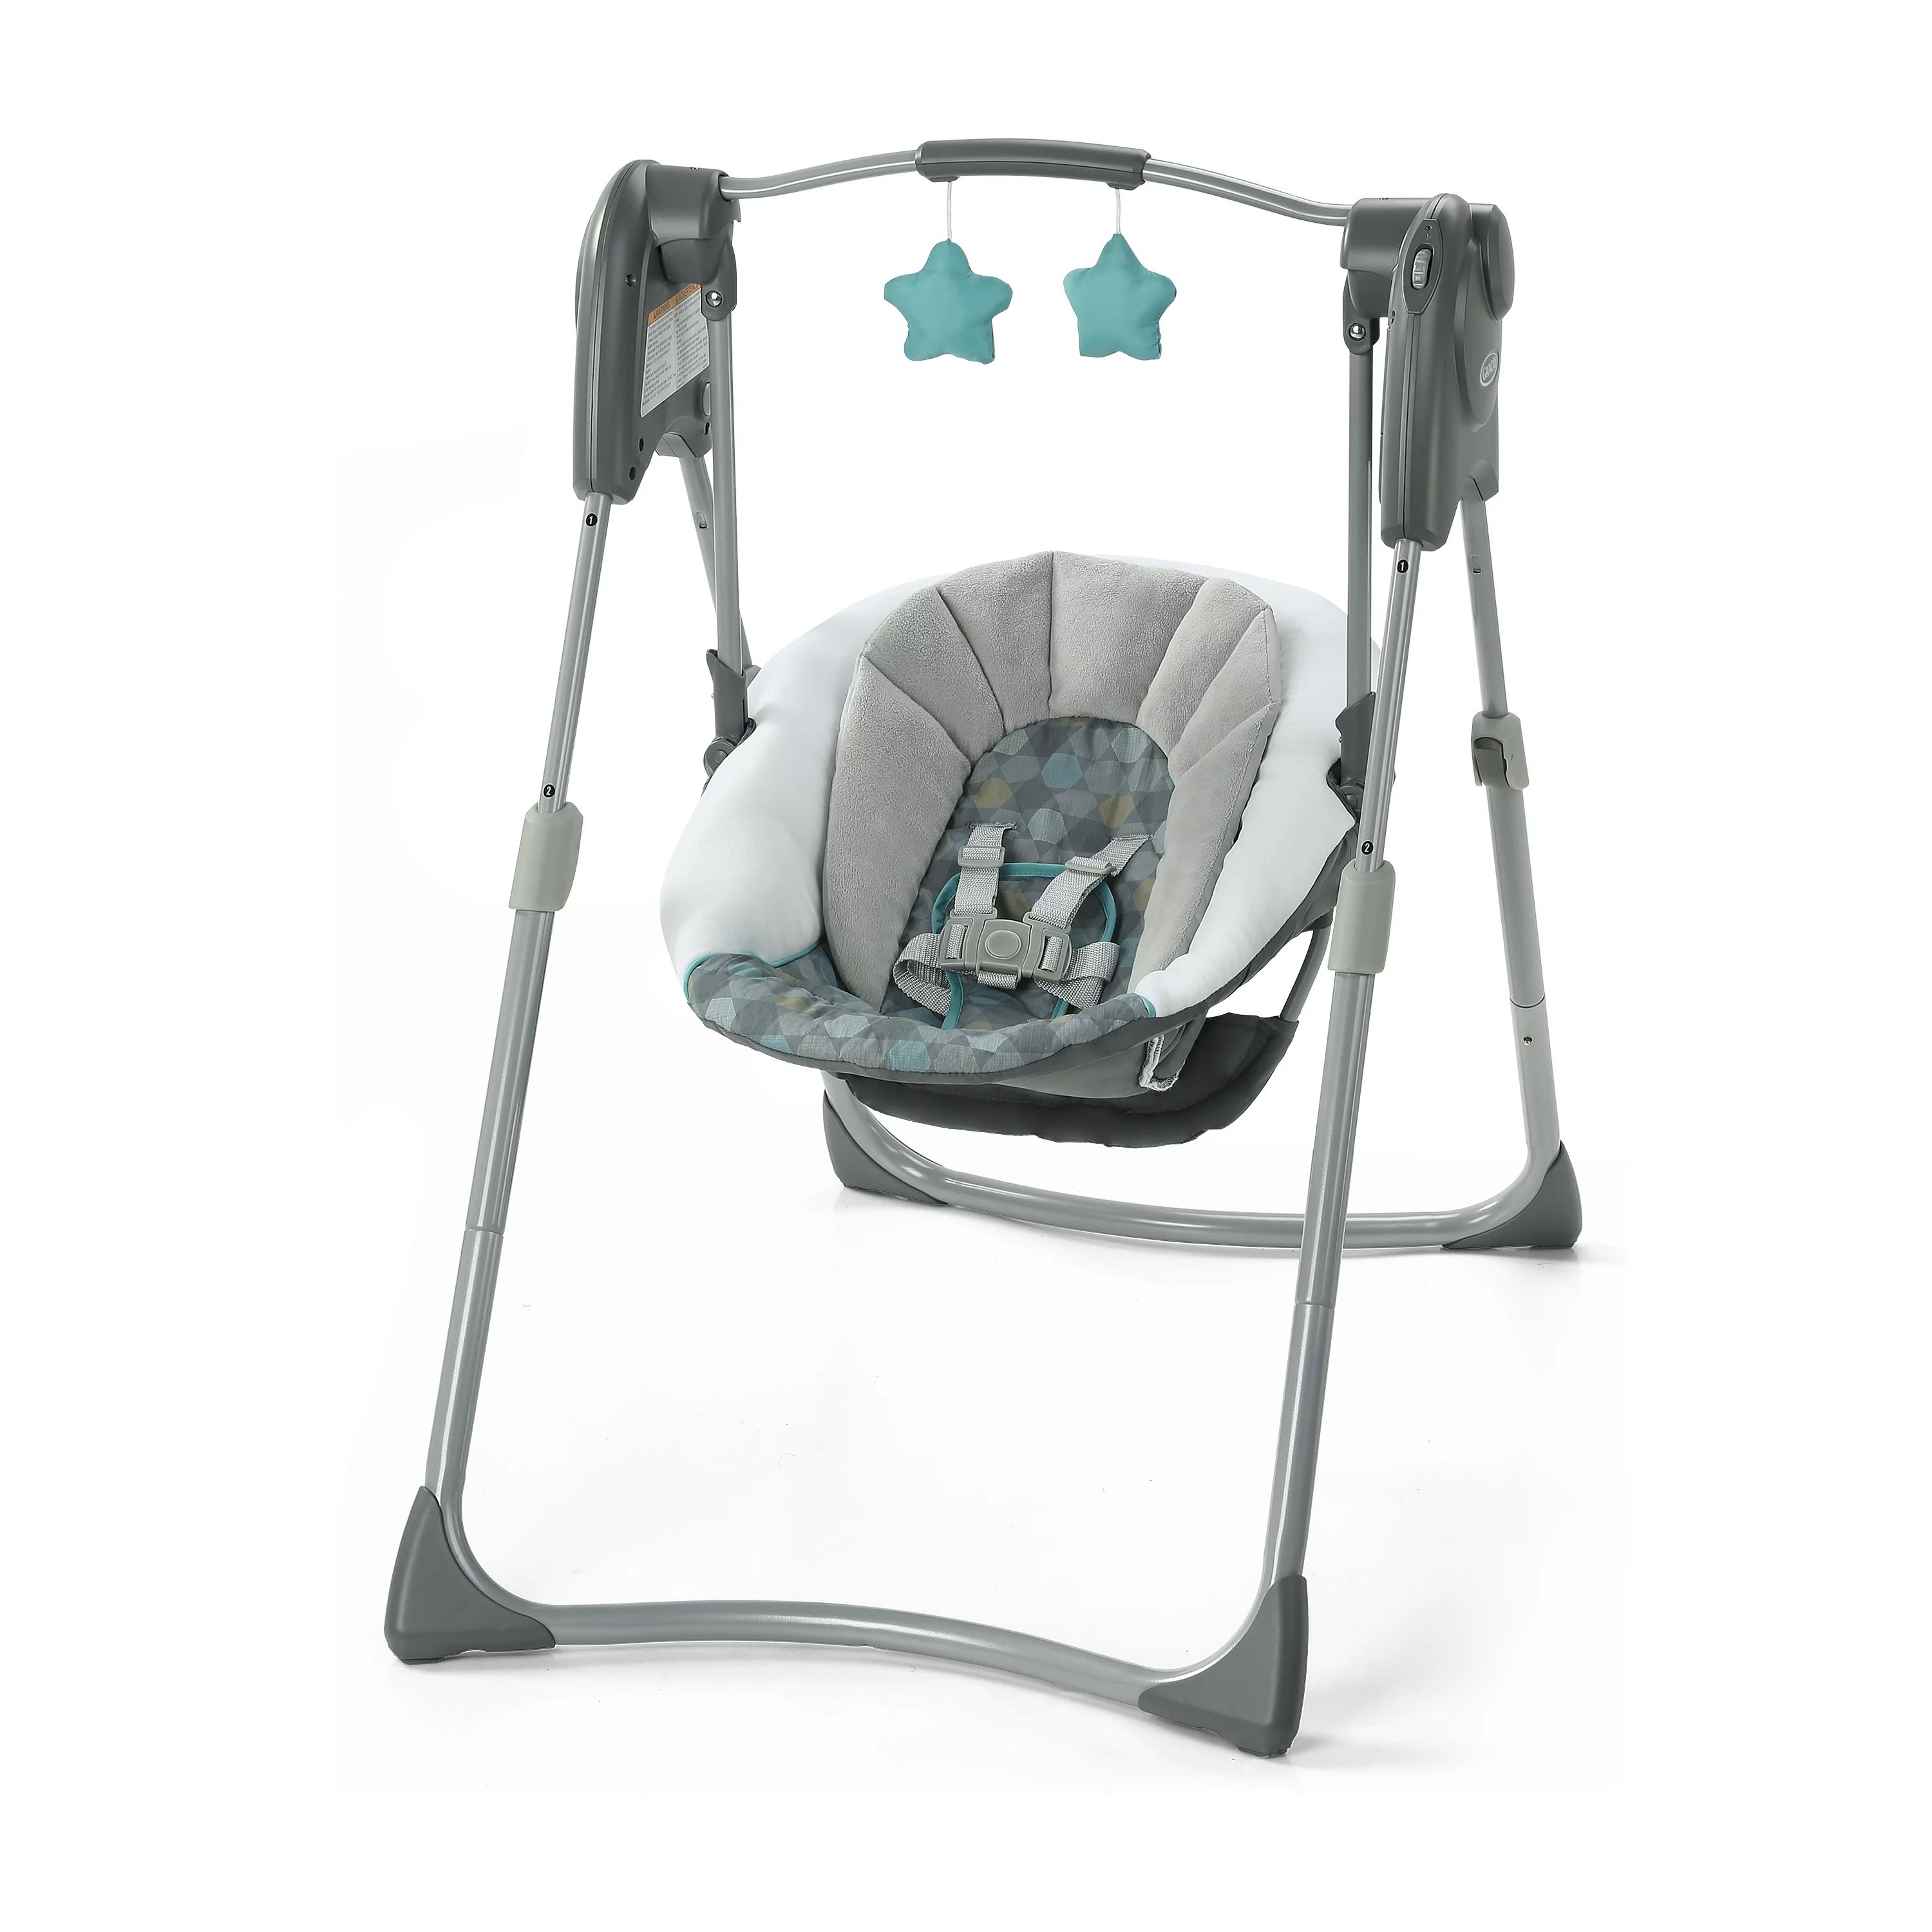 Graco Slim Spaces Compact Baby Swing, Space-Saving Design, Gray, Infant | Walmart (US)